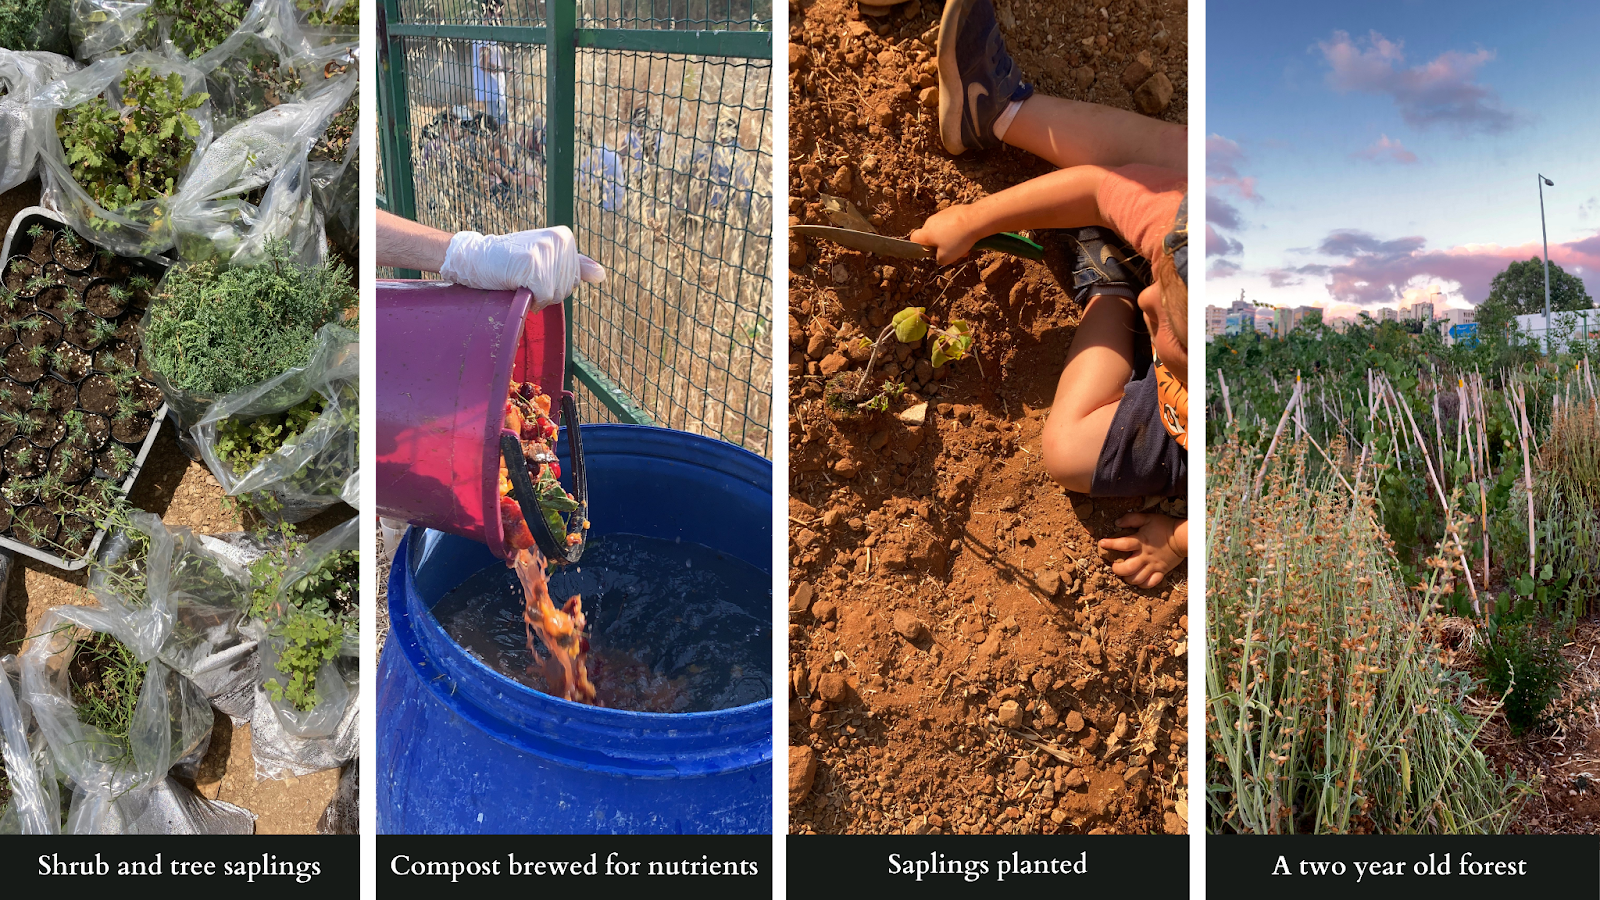 Four images: 1. A collection of shrub and tree saplings 2. Food waste being poured into a cobalt blue bin as compost to be brewed for nutrients 3. Sapling being planted into soil 4. Several feet of foliage in a field, a two year old forest.